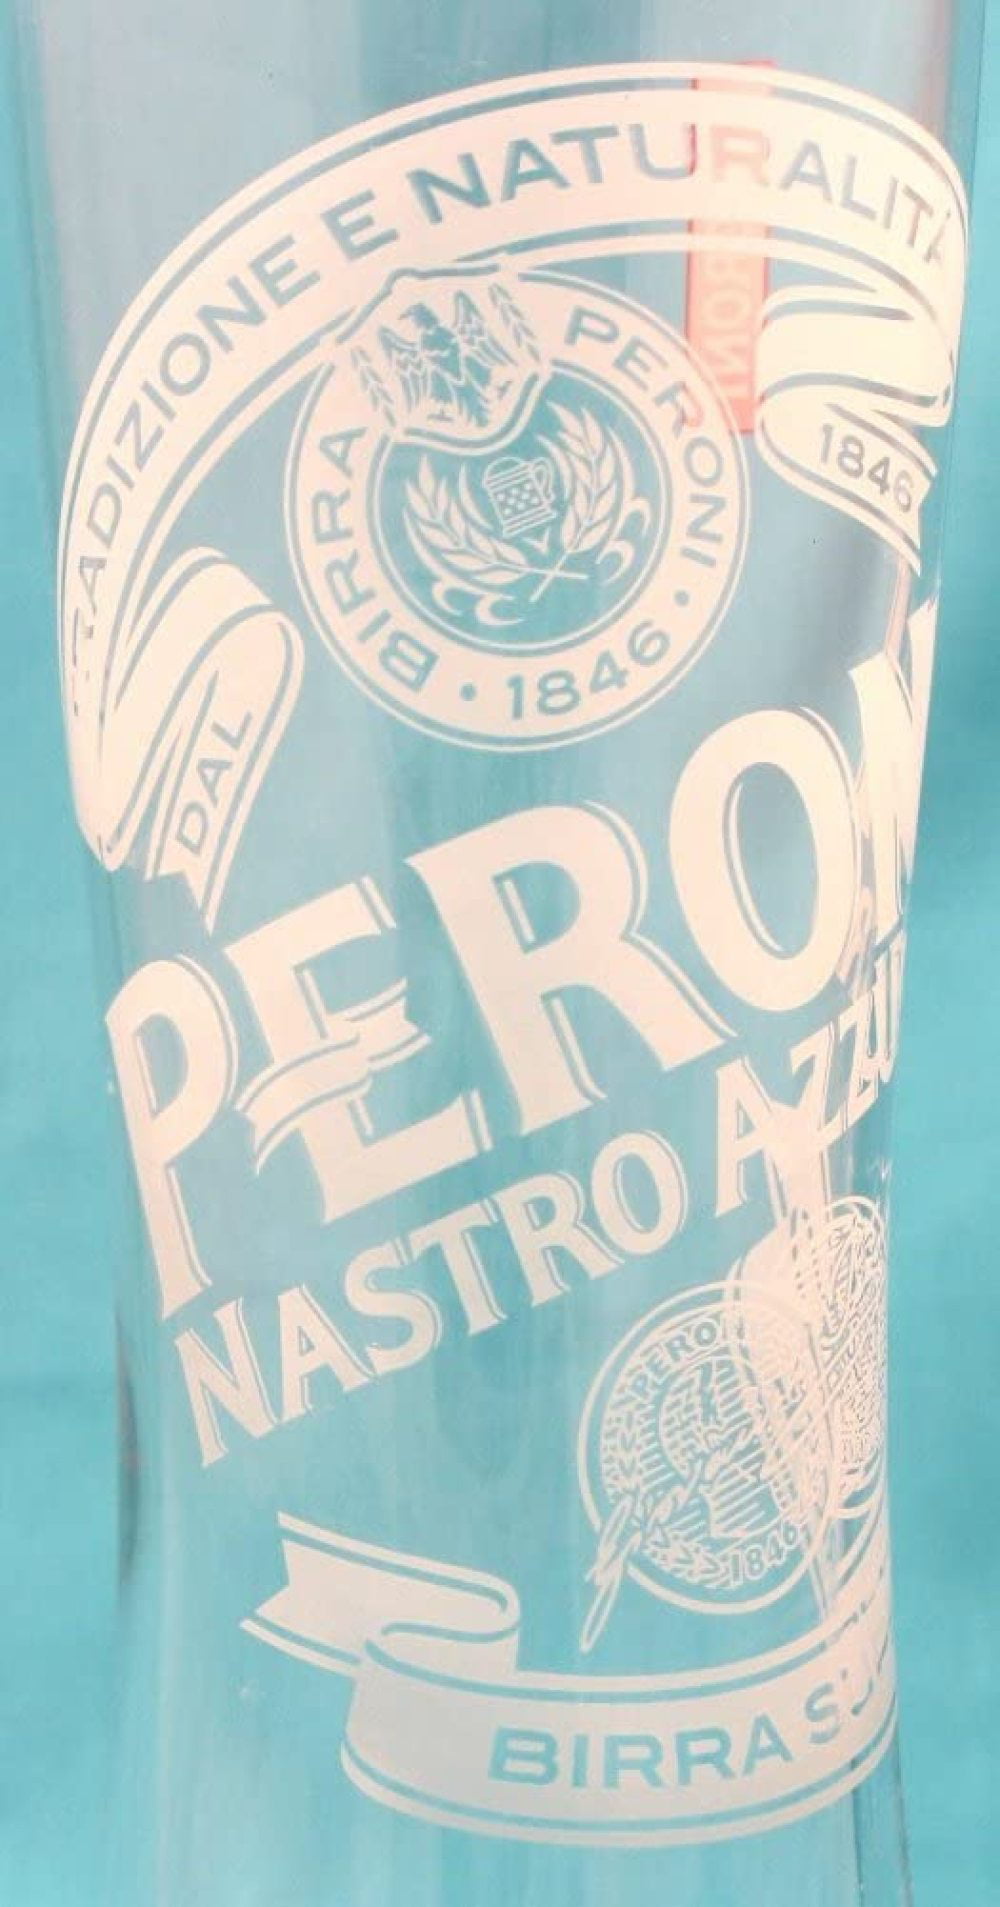 Peroni Nastro Azzuro Birra Frosted Etched 0.4l Beer Glass Italy Brewery 